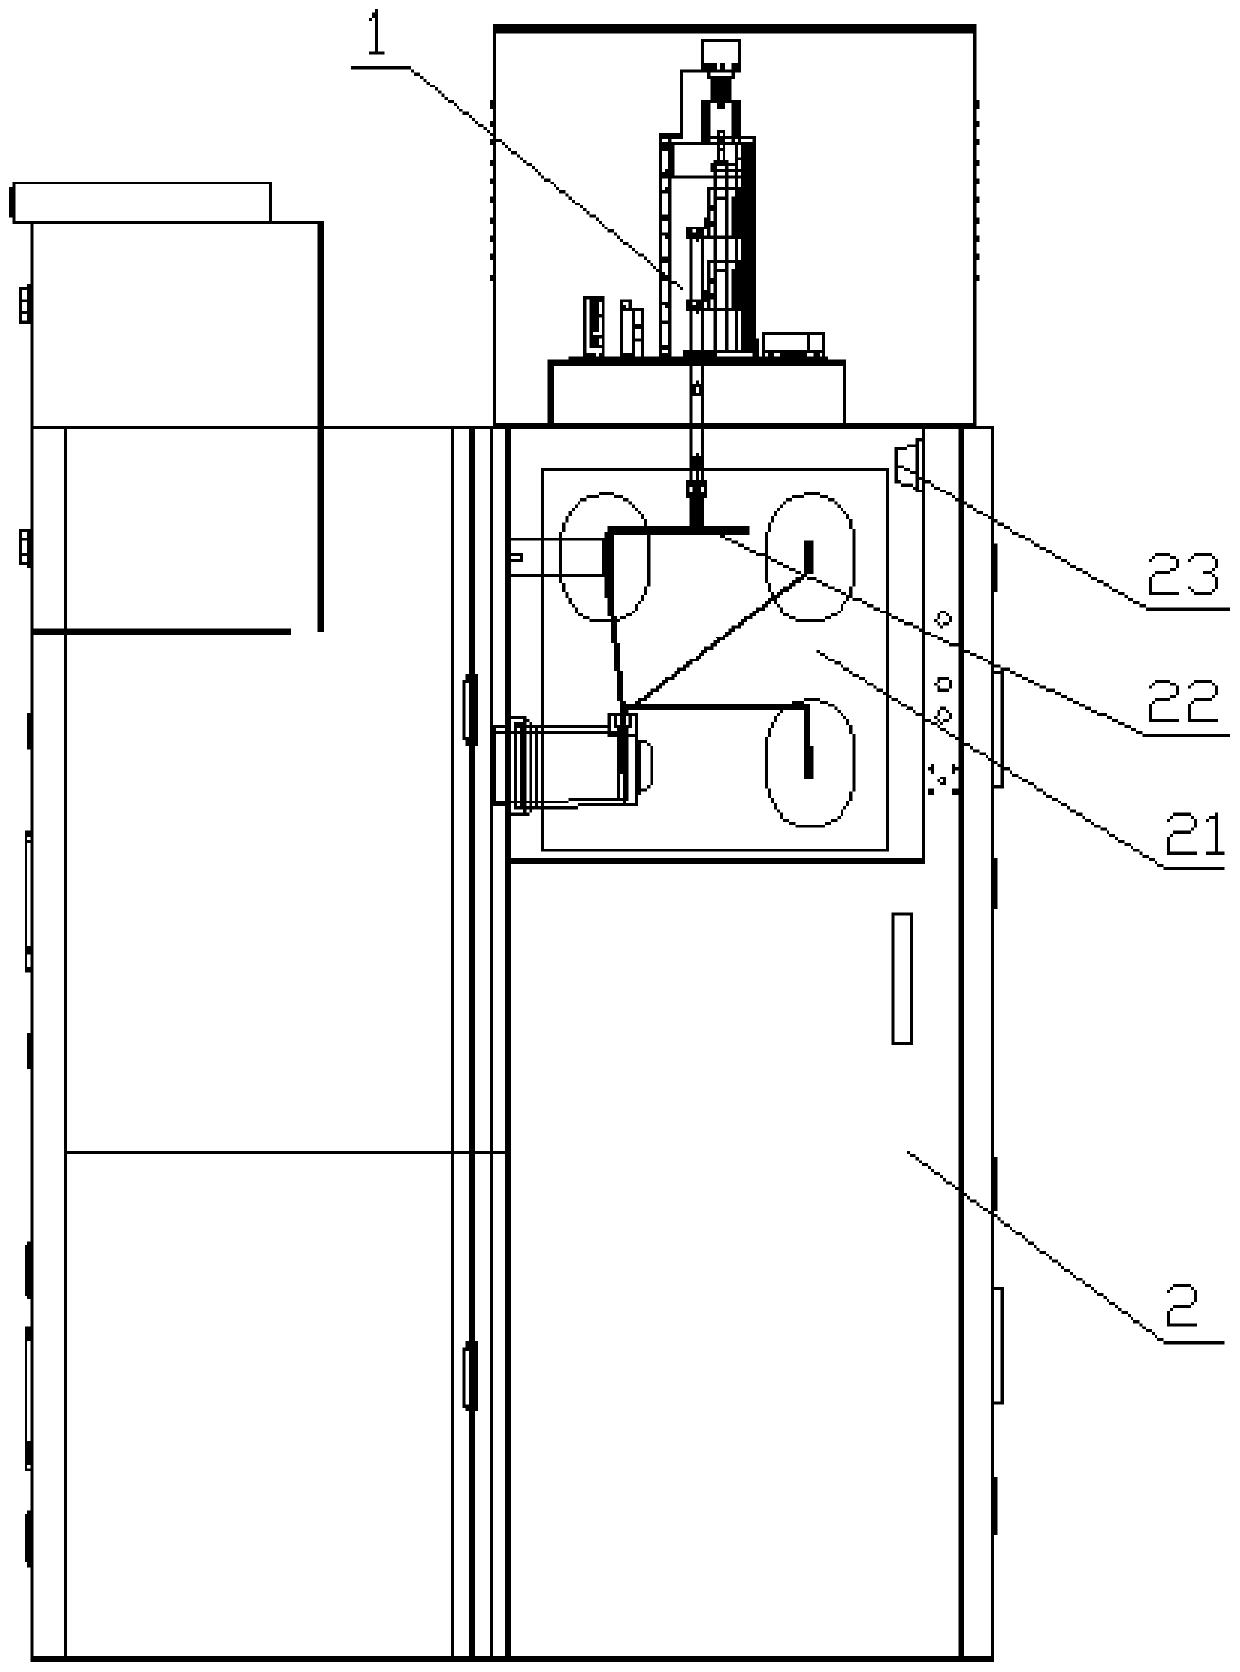 Switch cabinet partial discharge simulation device based on automatic control